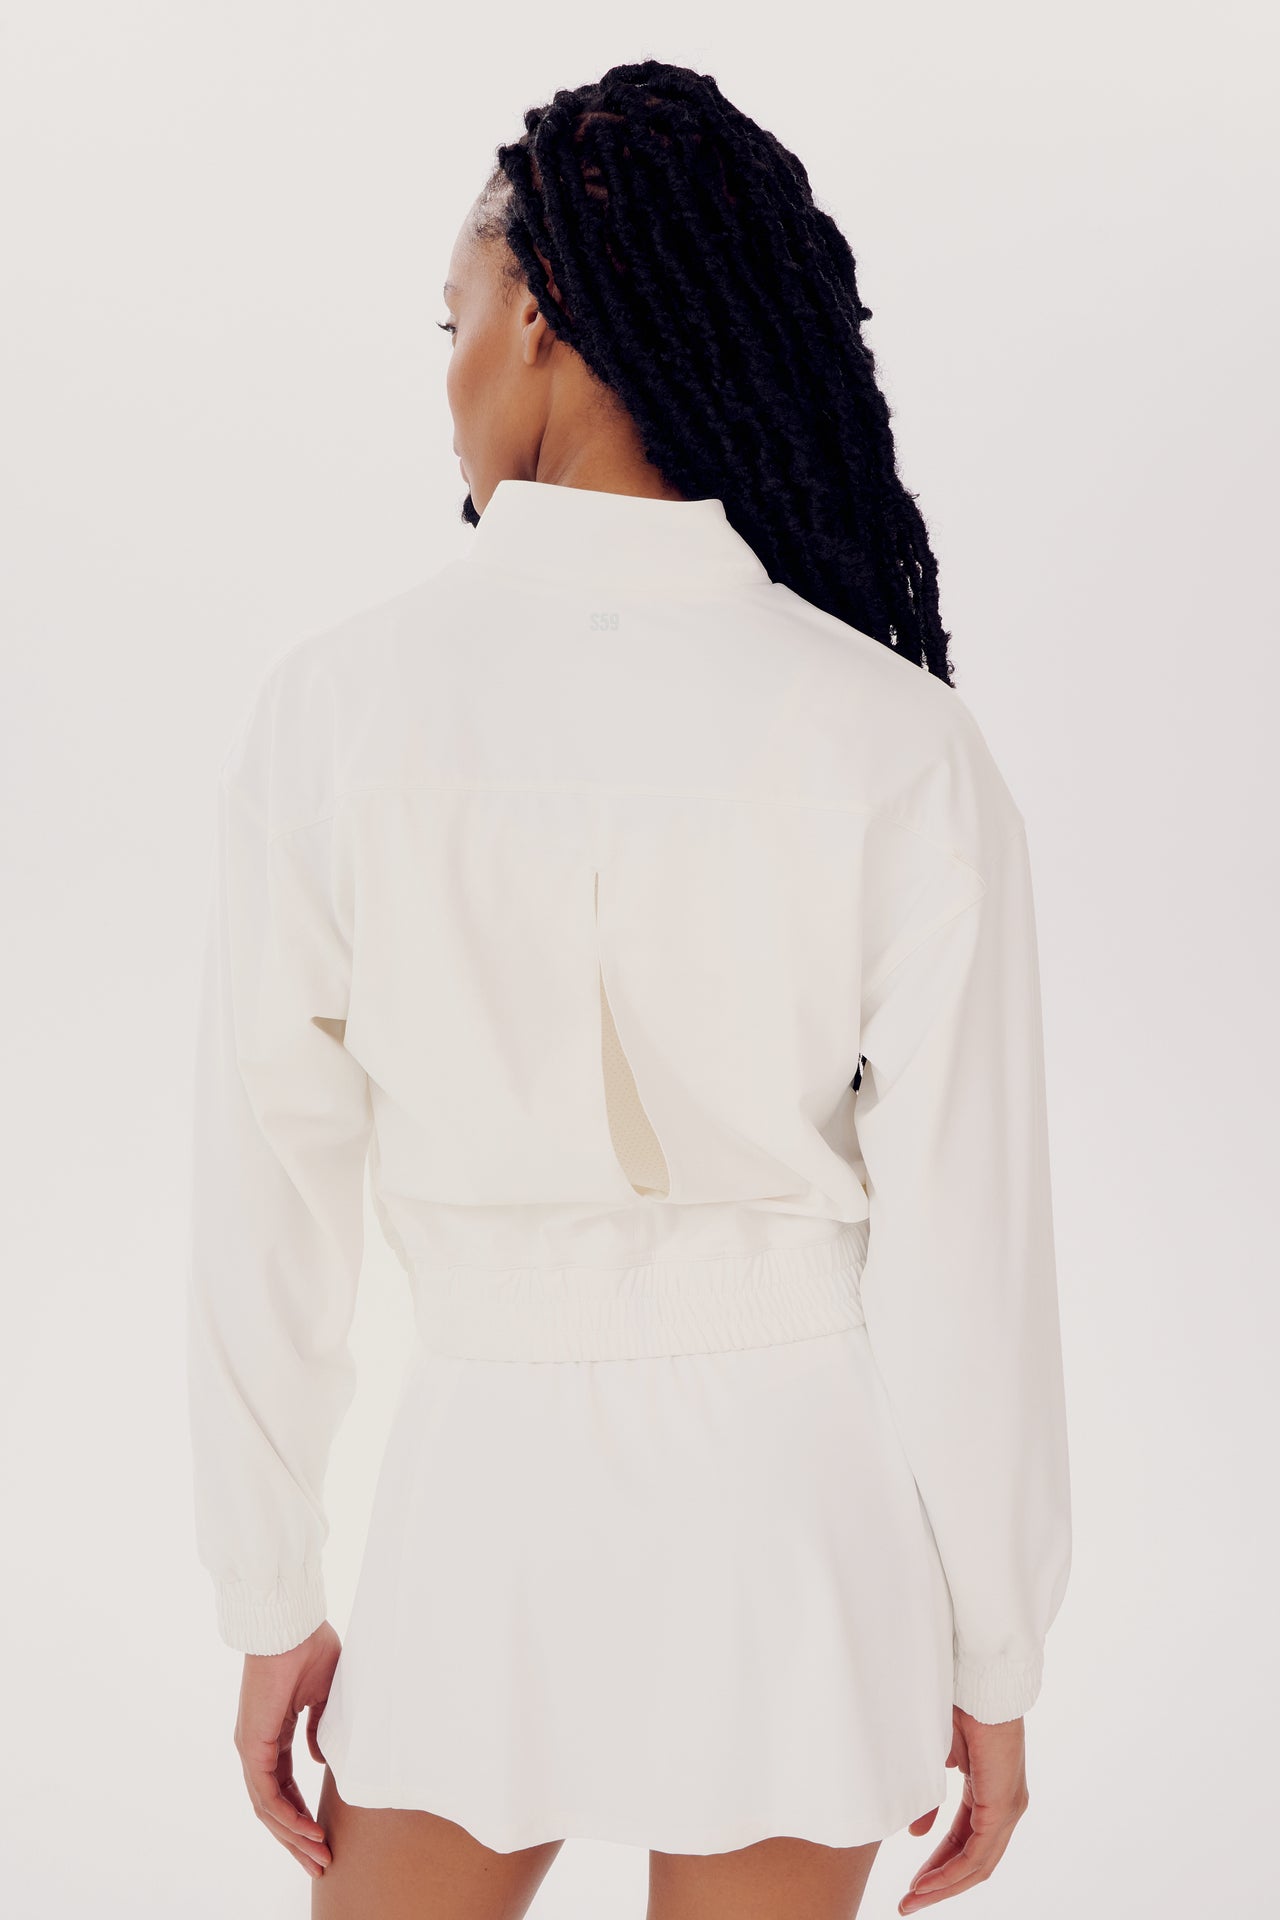 Rear view of a woman wearing a stylish white blouse and shorts, complemented by a SPLITS59 Harlowe Rigor Jacket in White, standing against a plain background. Her long braided hair cascades down her back.